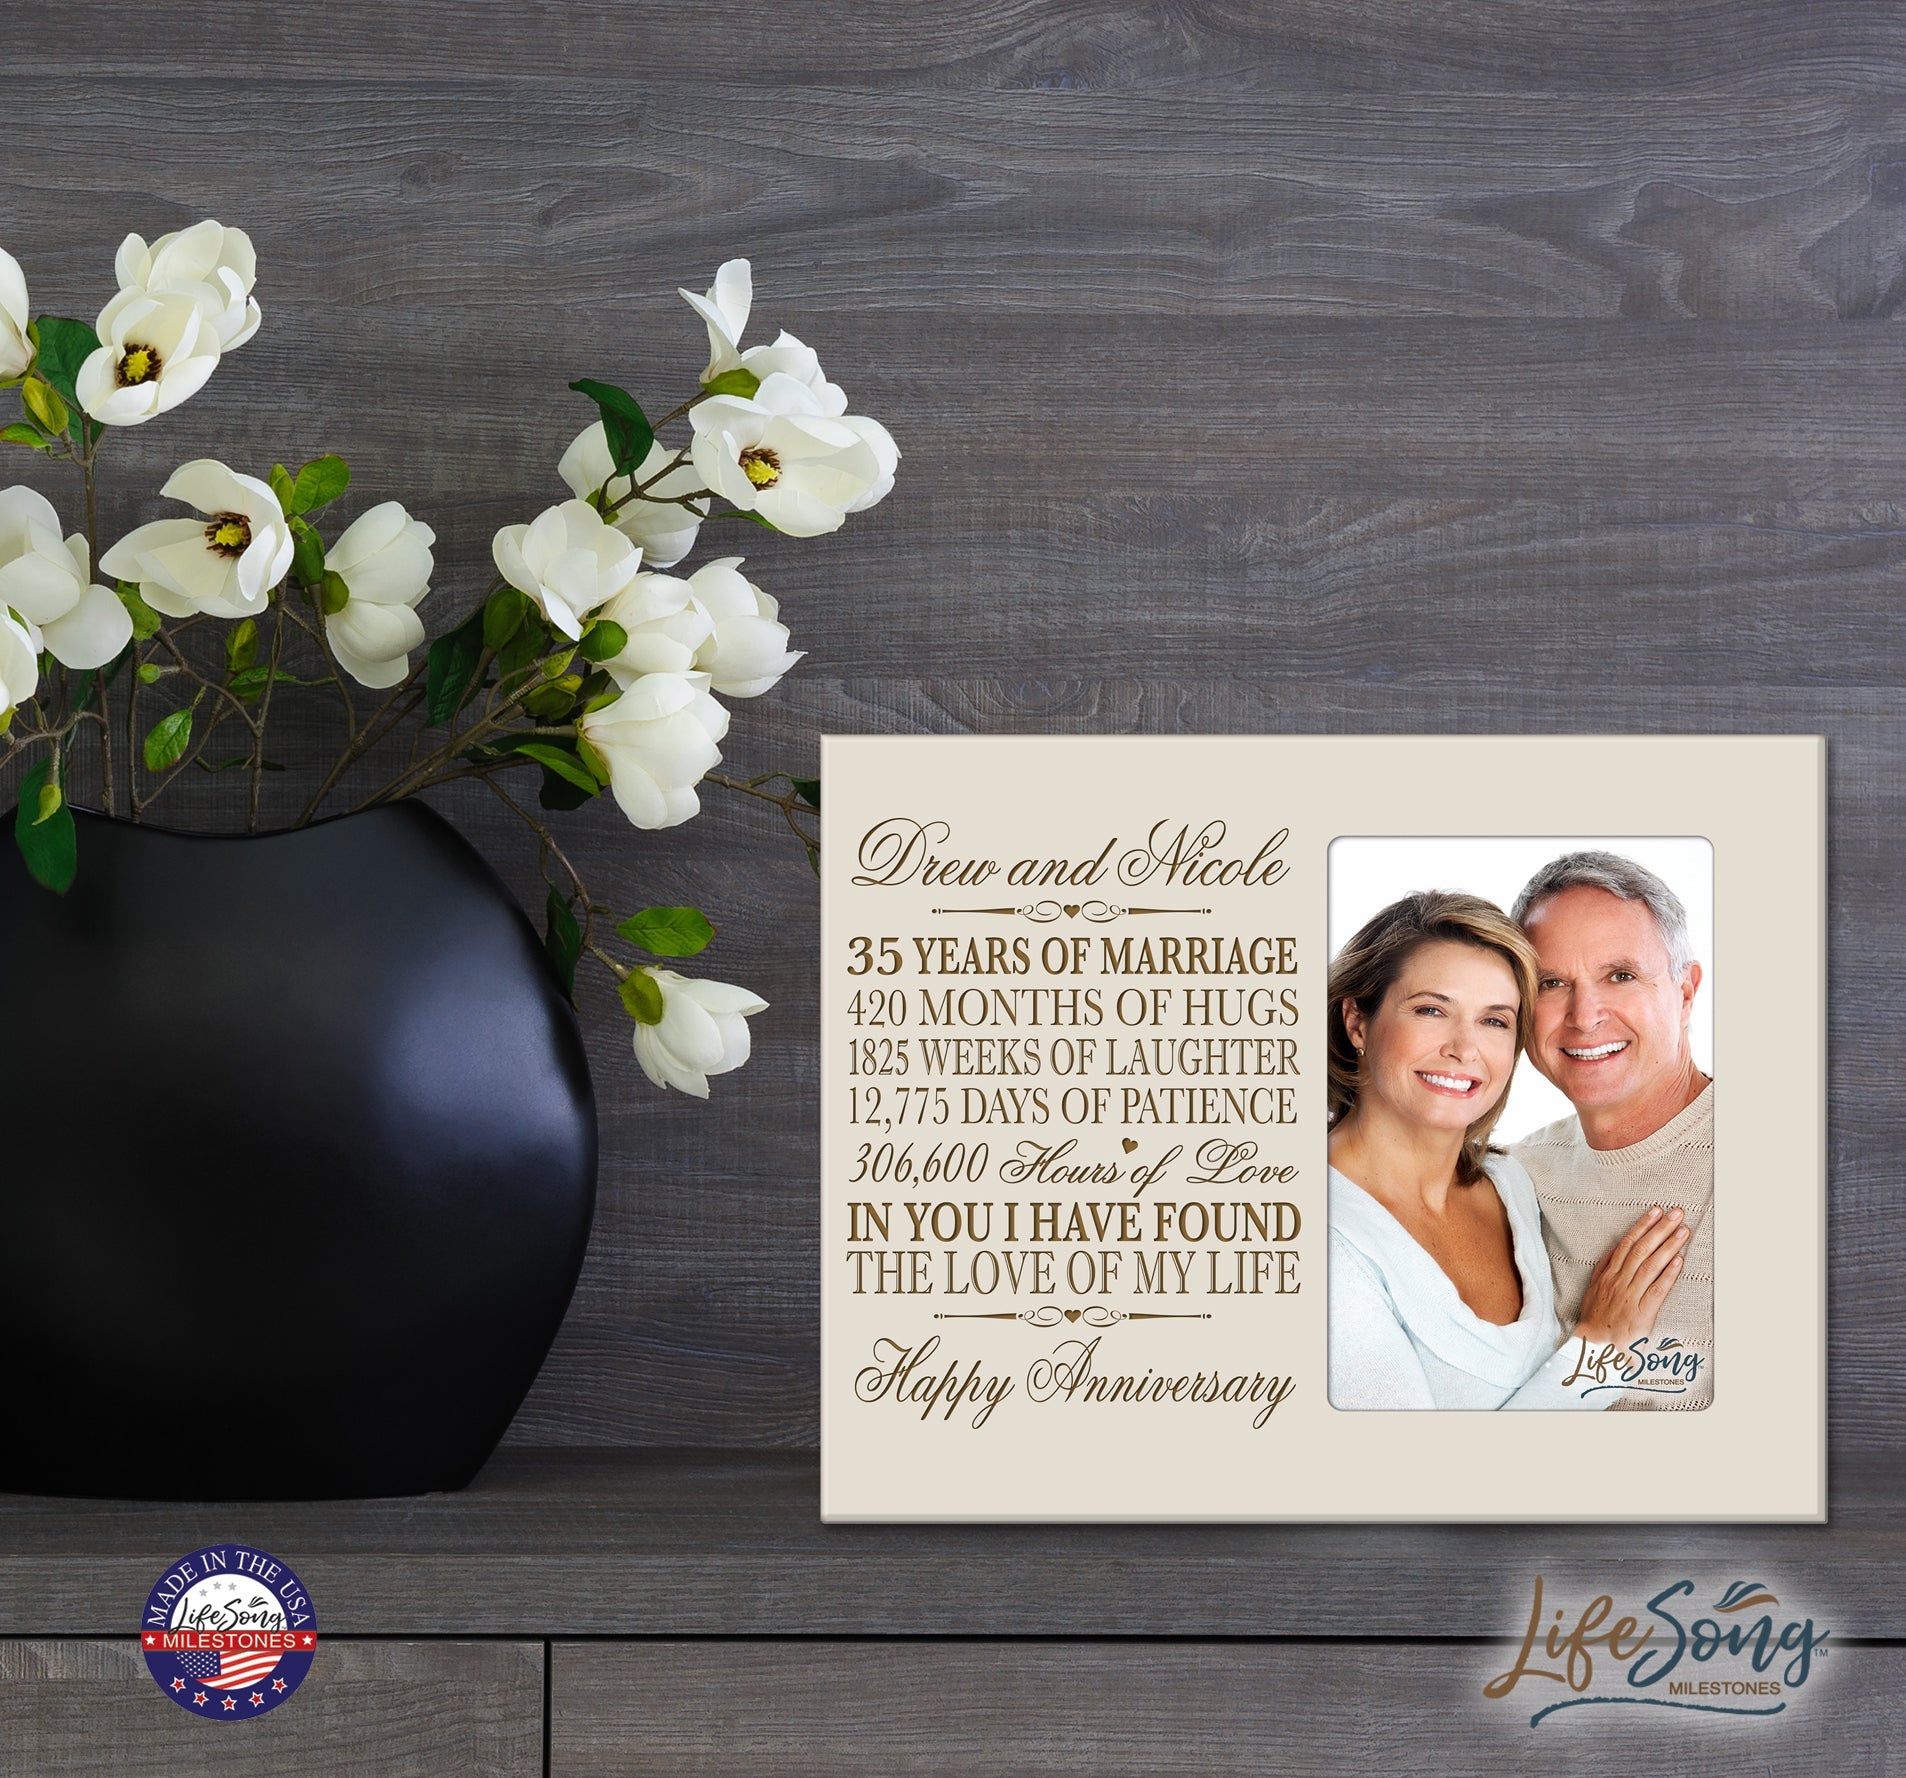 Unique Picture Frame 35th Wedding Anniversary Home Decor – Personalized Gift for Couples